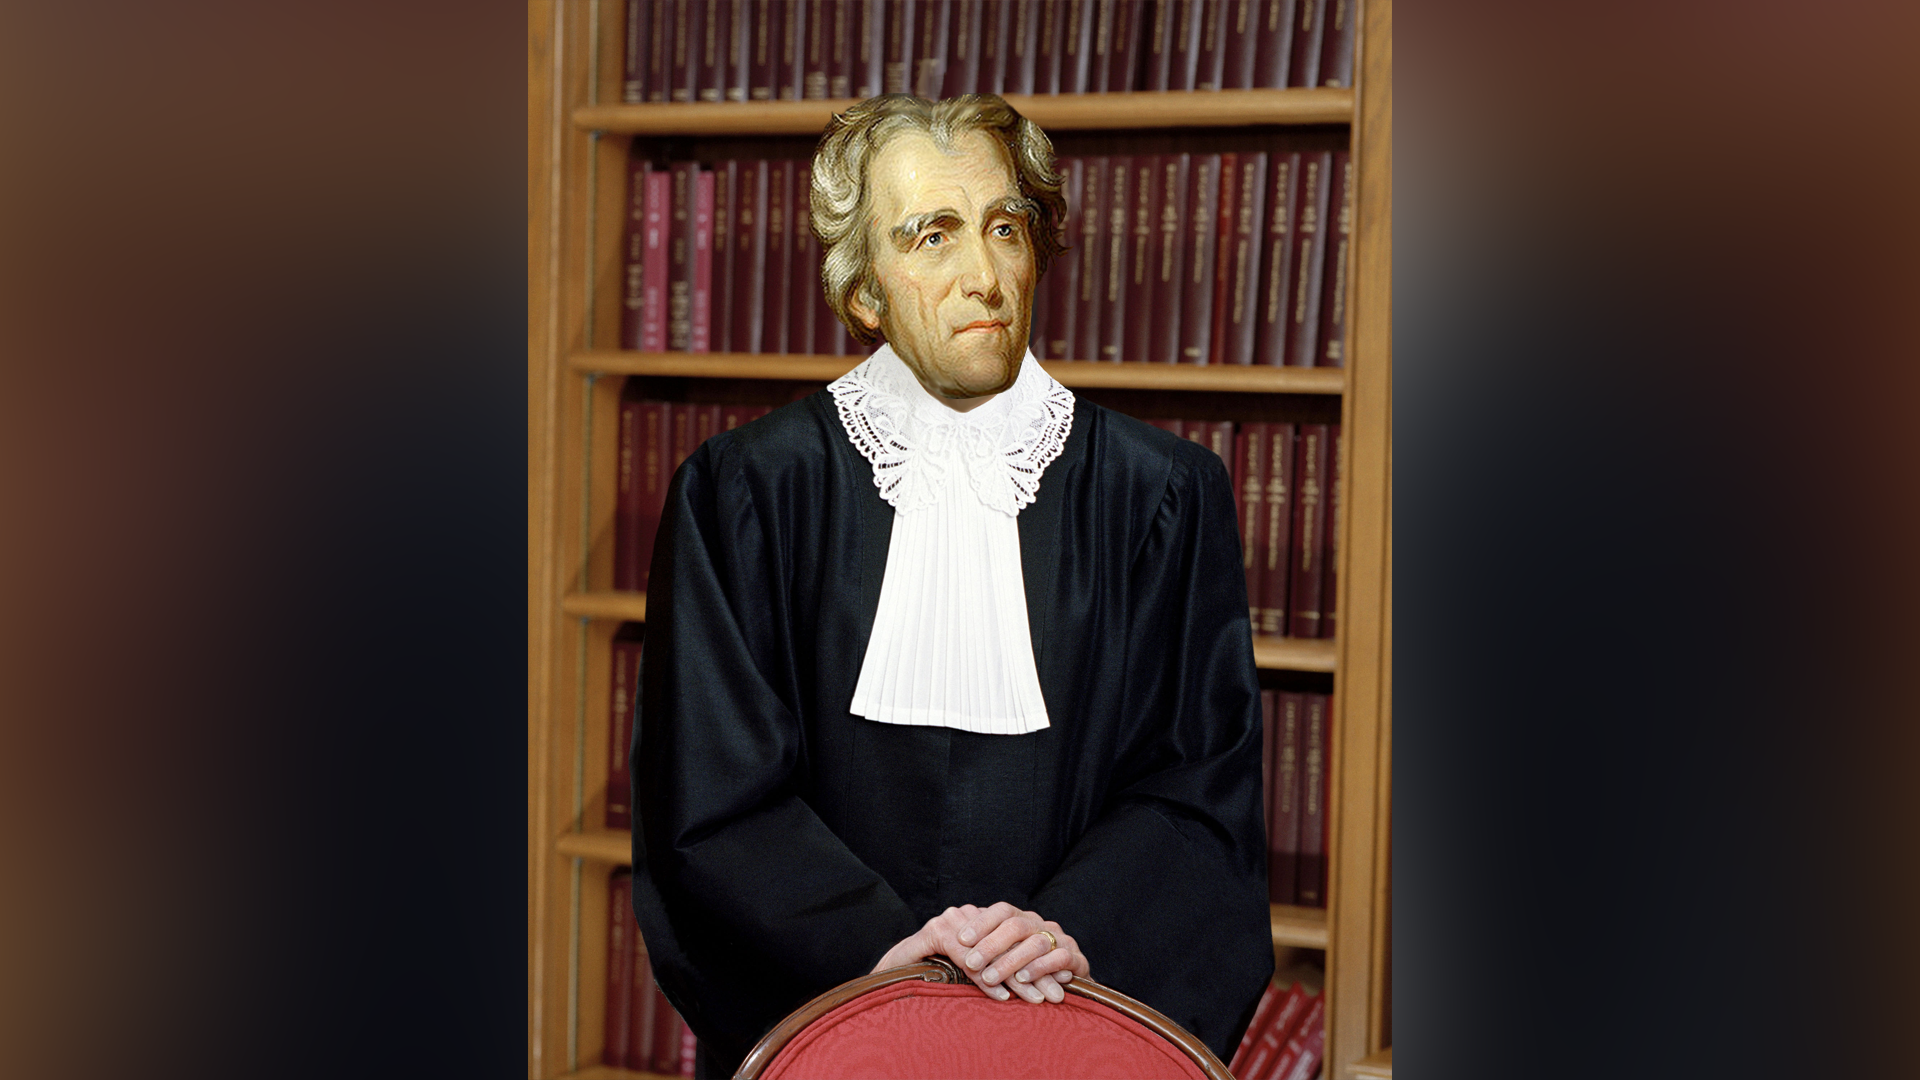 After spending only one year as a Senator in Washington, Jackson returned home to work as a judge for the Tennessee superior court. Source:  http://millercenter.org/president/jackson/essays/biography/print